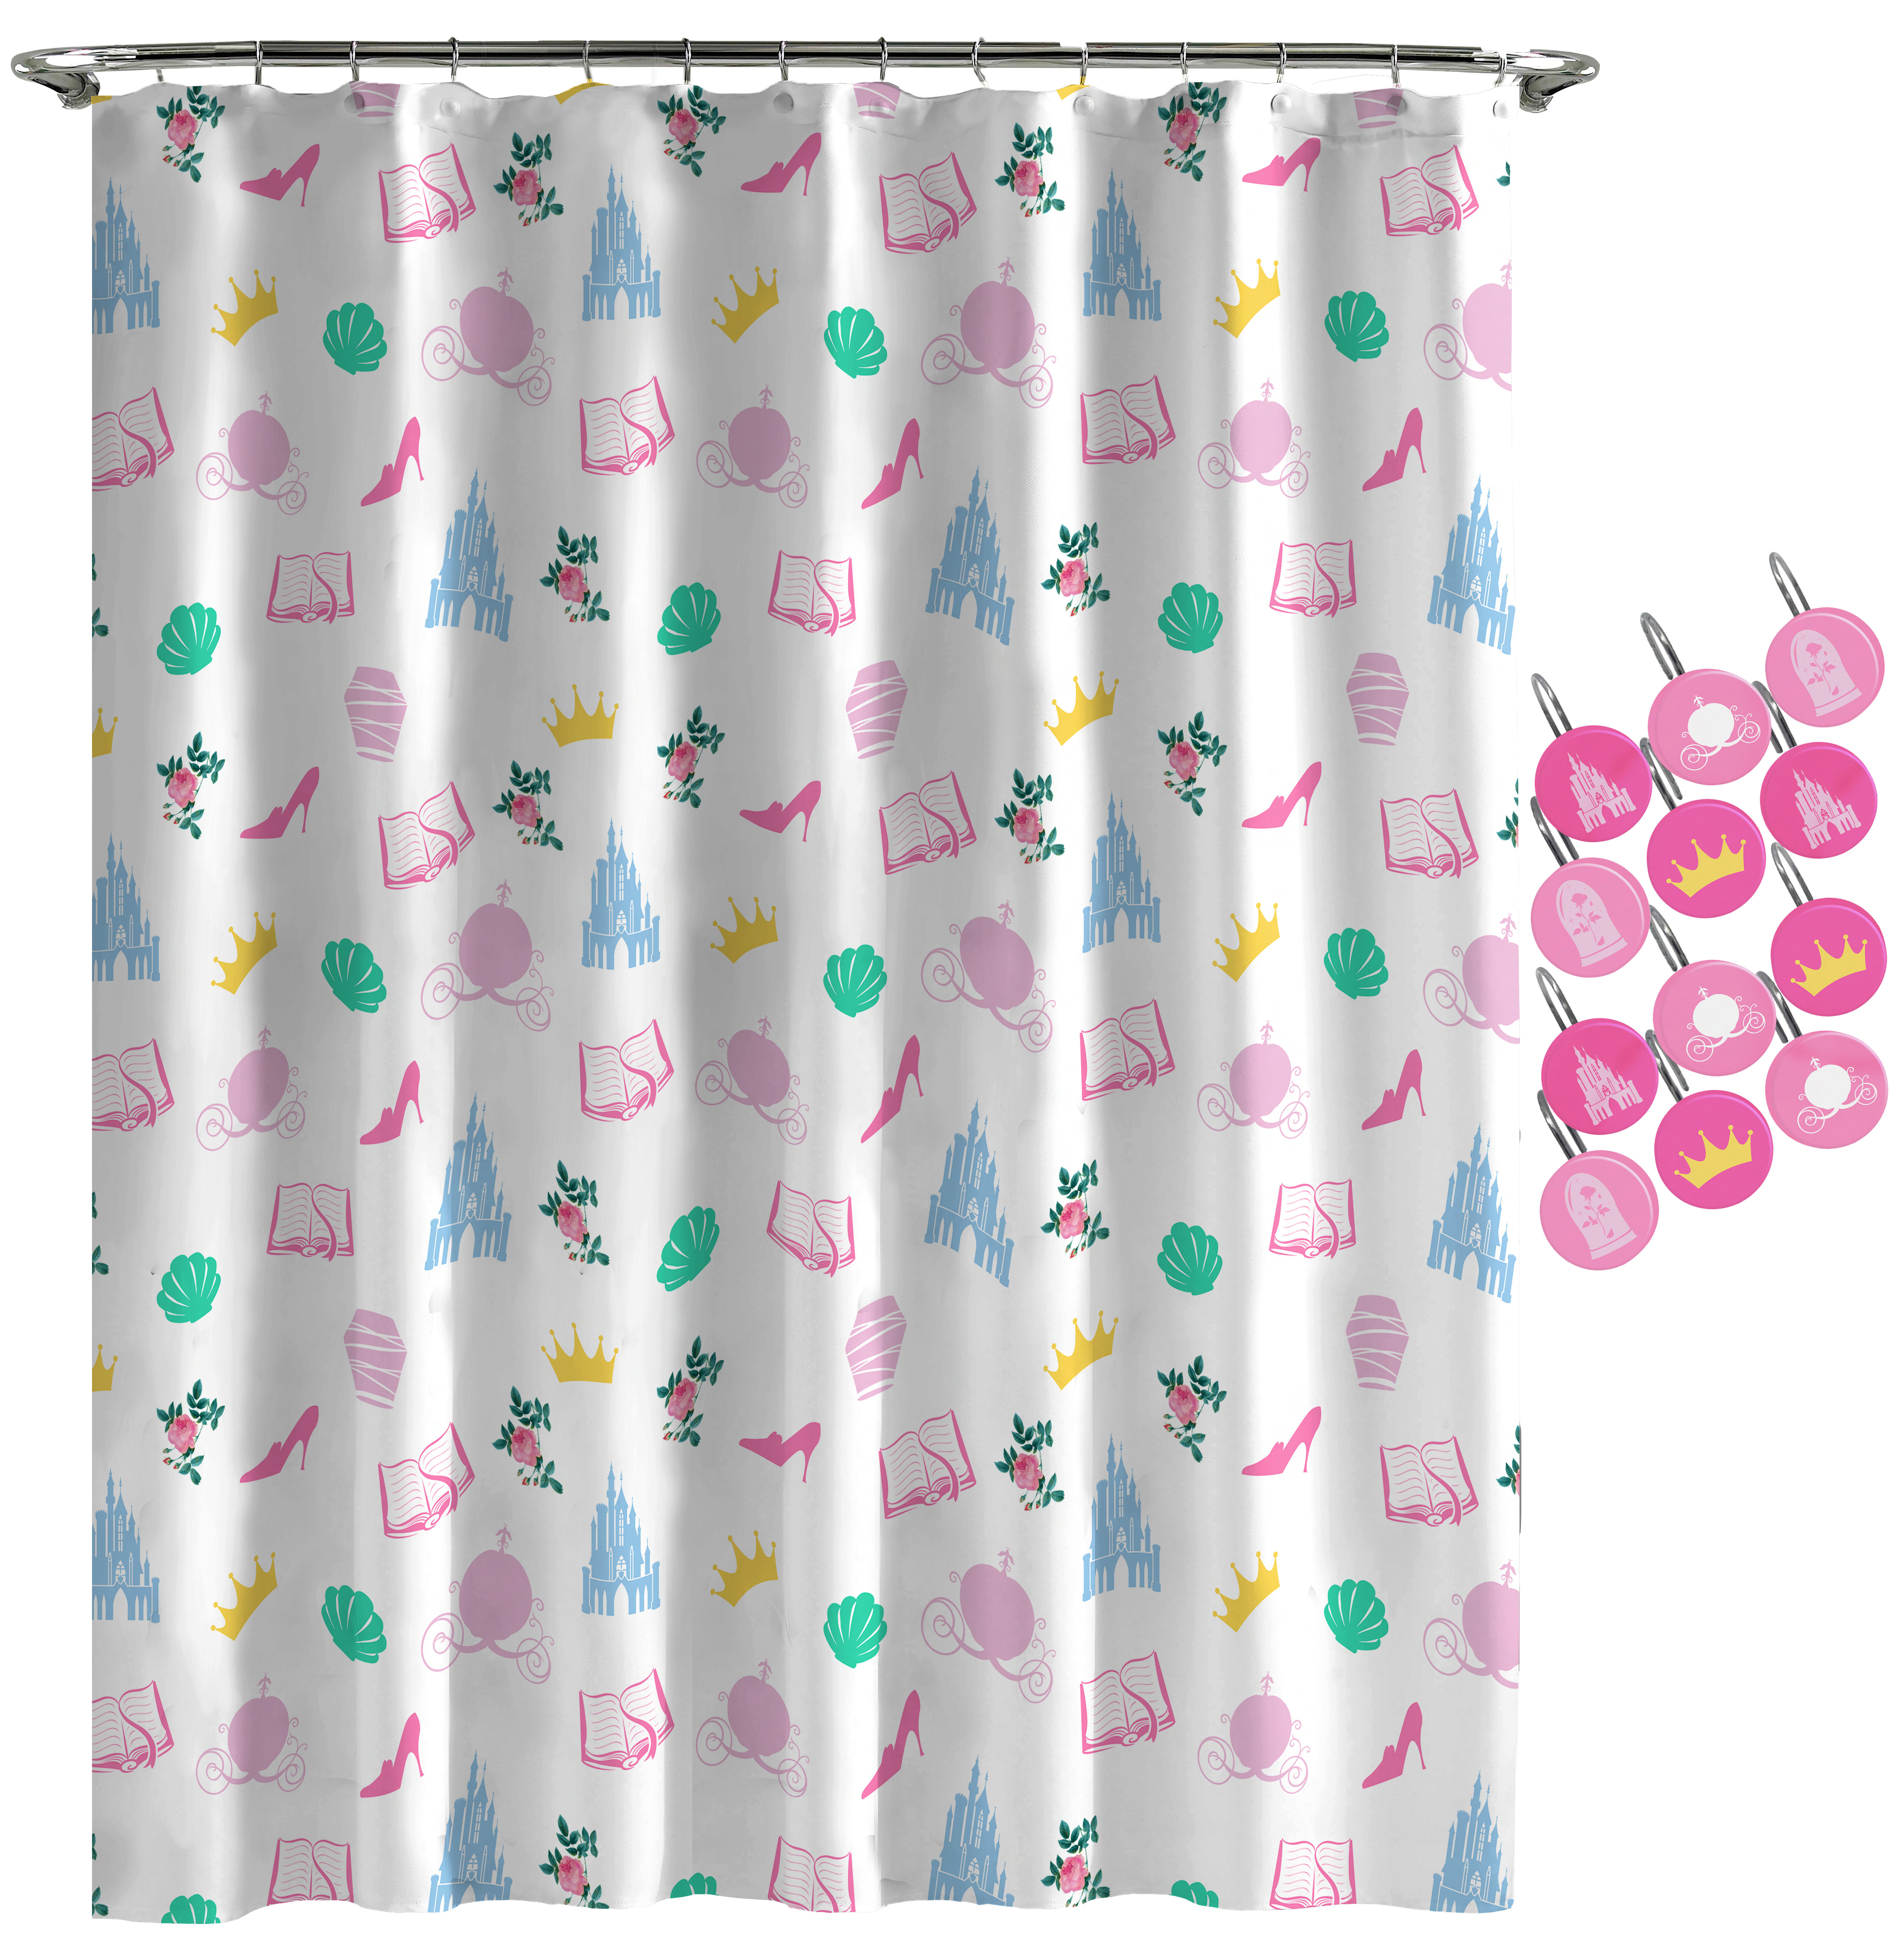 Disney Characters Design Waterproof Fabric Shower Curtain Bath Curtain With Hook